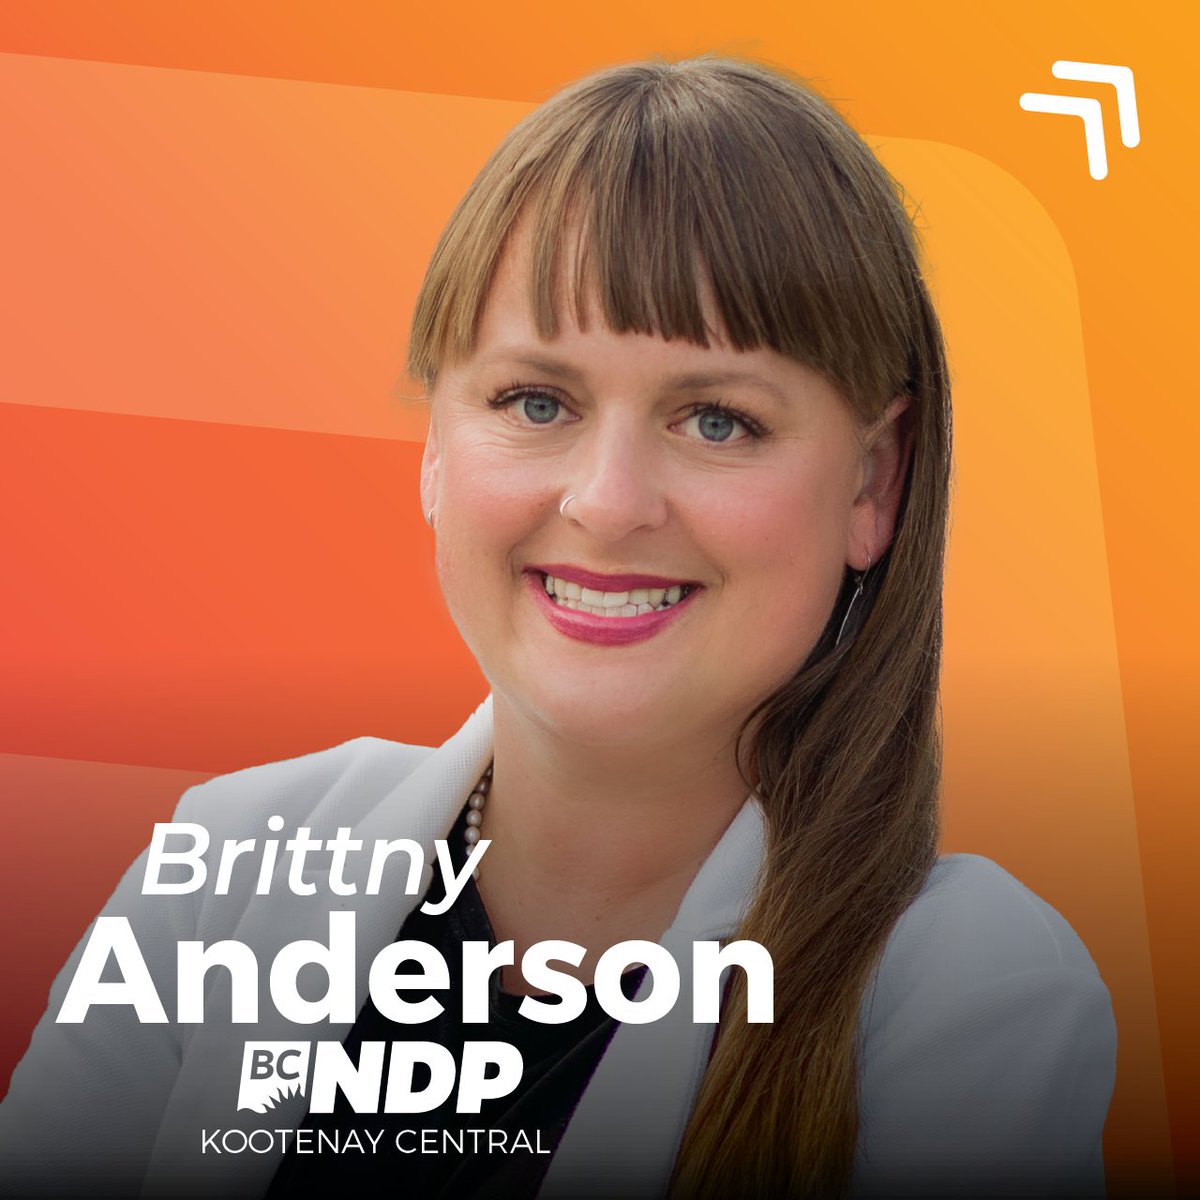 Brittny Anderson is our BC NDP nominee in Kootenay Central. A lifelong resident of the Kootenays and former small-business owner, Brittny was first elected MLA for Nelson-Creston in 2020. Welcome Brittny!